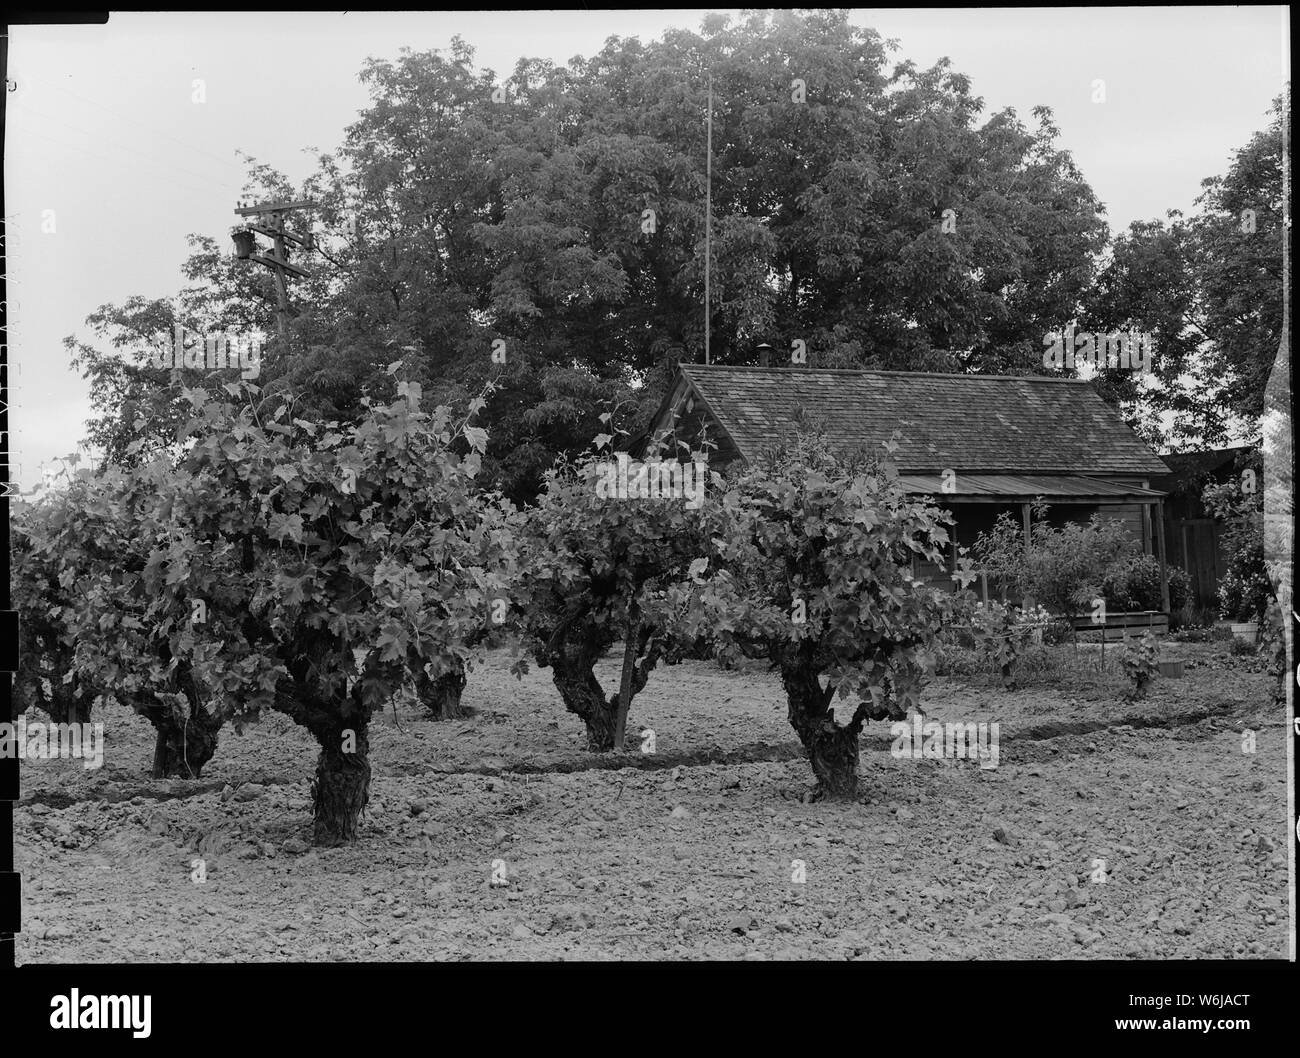 Lodi, California. Farm home of laborer of Japanese ancestry. This vineyard is in the highly produc . .; Scope and content:  The full caption for this photograph reads: Lodi, California. Farm home of laborer of Japanese ancestry. This vineyard is in the highly productive area of San Joaquin County. Stock Photo